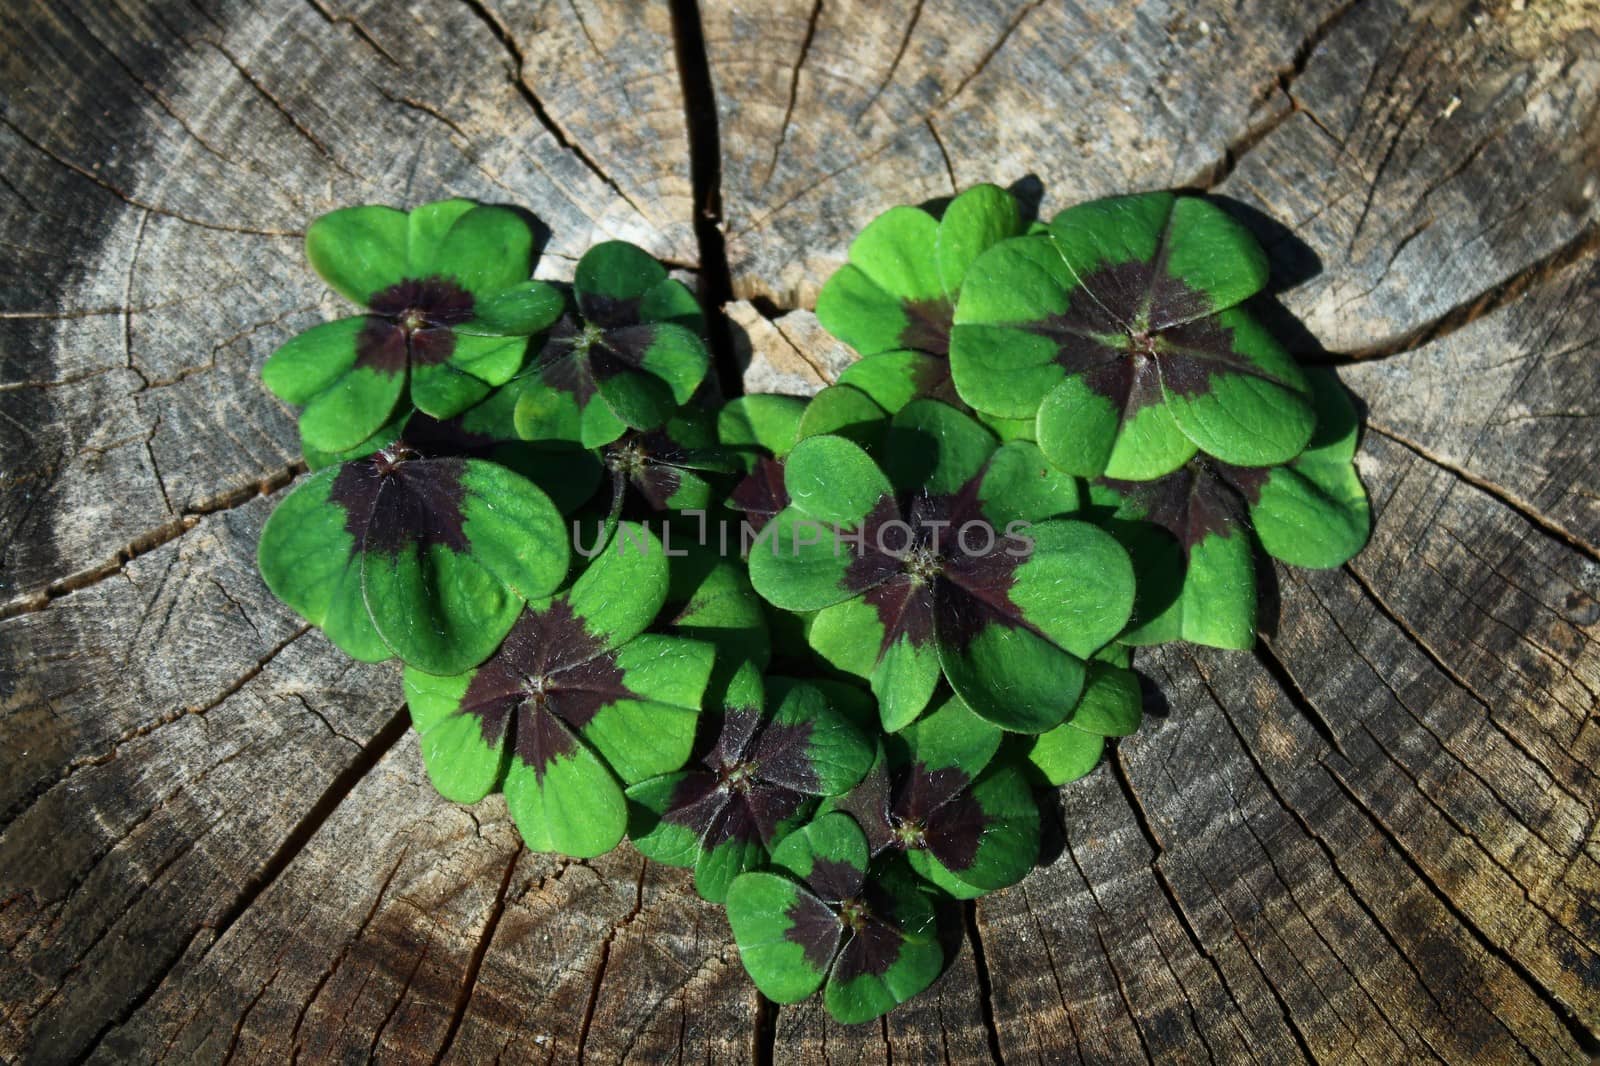 The picture shows lucky clover on wooden underground.